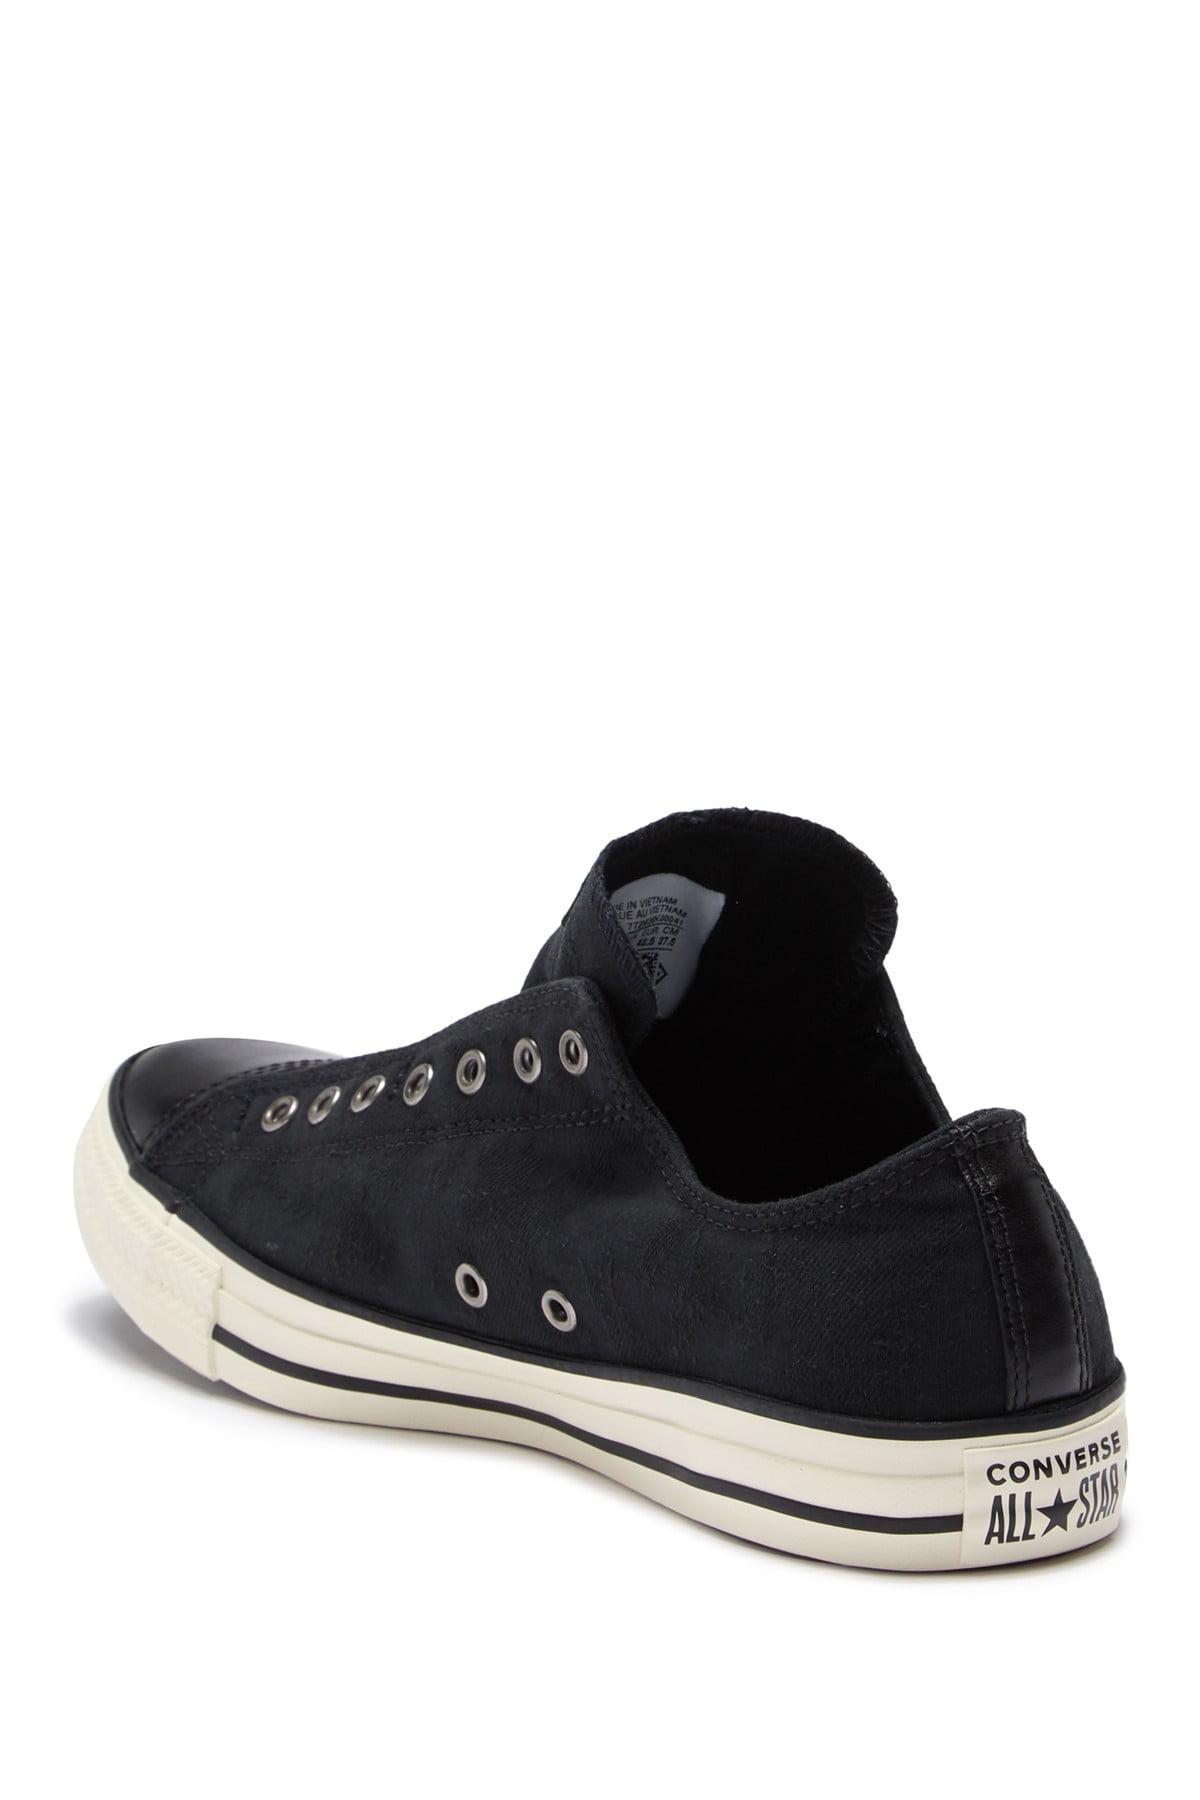 Converse Canvas Chuck Taylor All Star Slip On Laceless Sneaker in Black for  Men - Lyst